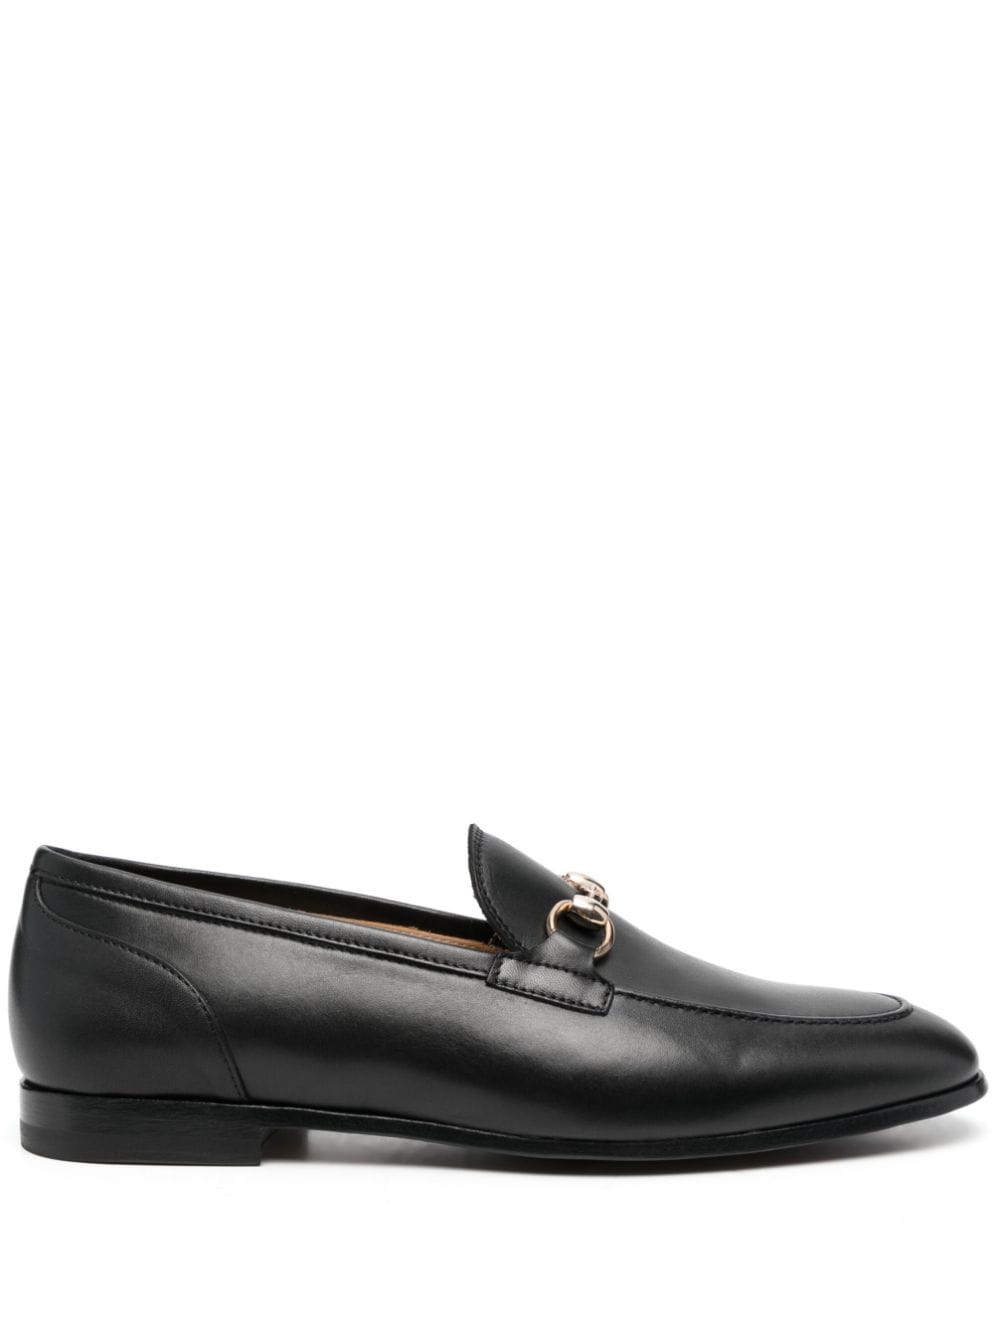 Scarosso buckle-detail leather loafers - Black von Scarosso